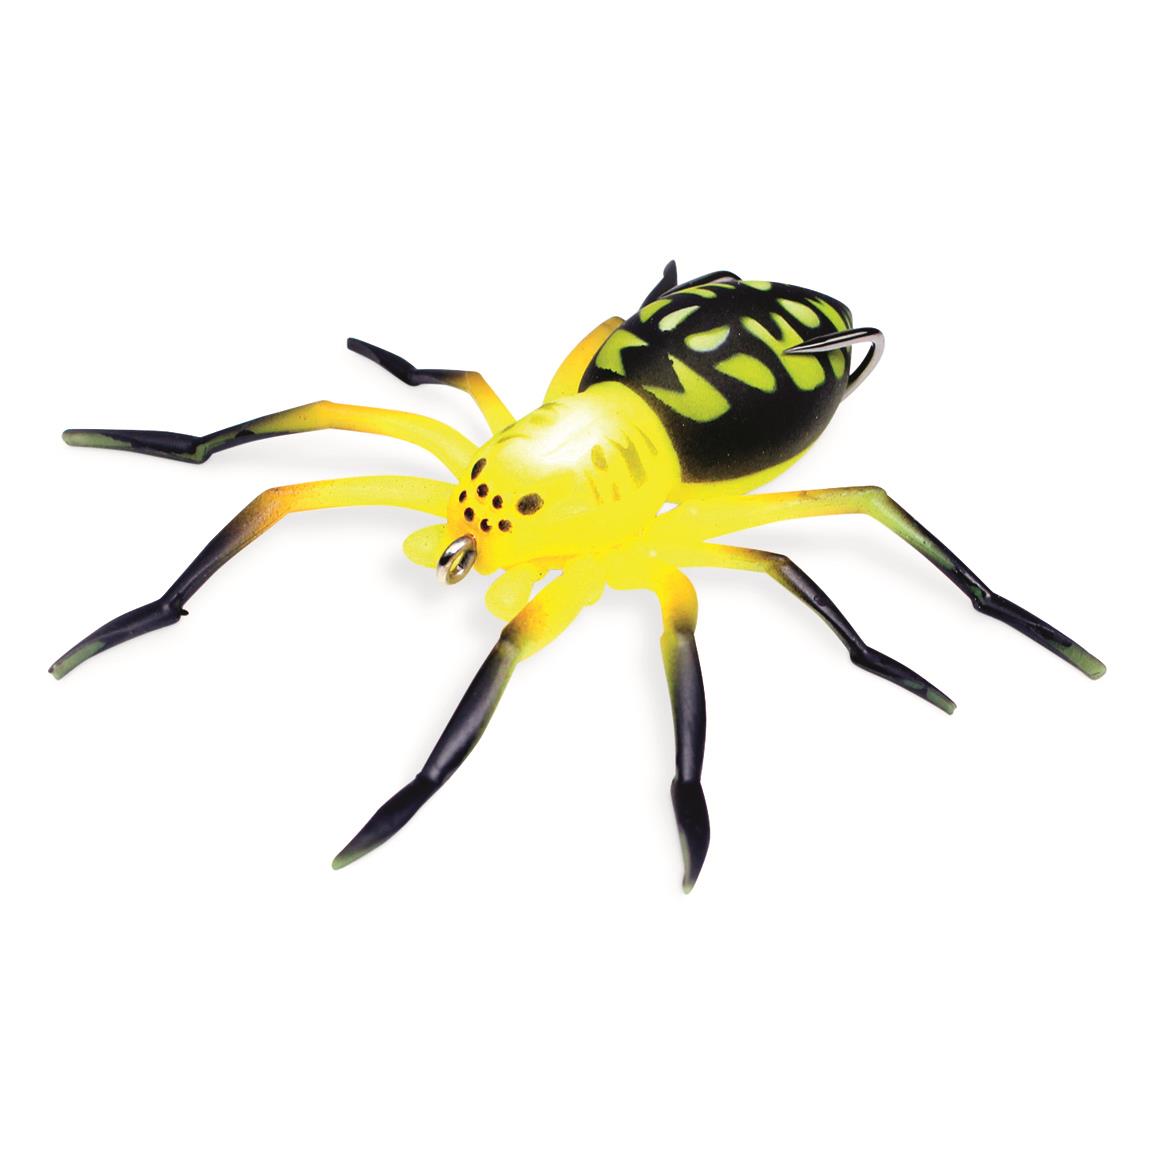 LUNKERHUNT Phantom Spider Lure for Bass Fishing (2.5 Inch) | Topwater  Spider Fishing Lure with Natural Walking Action | Soft Hollow Body Weedless